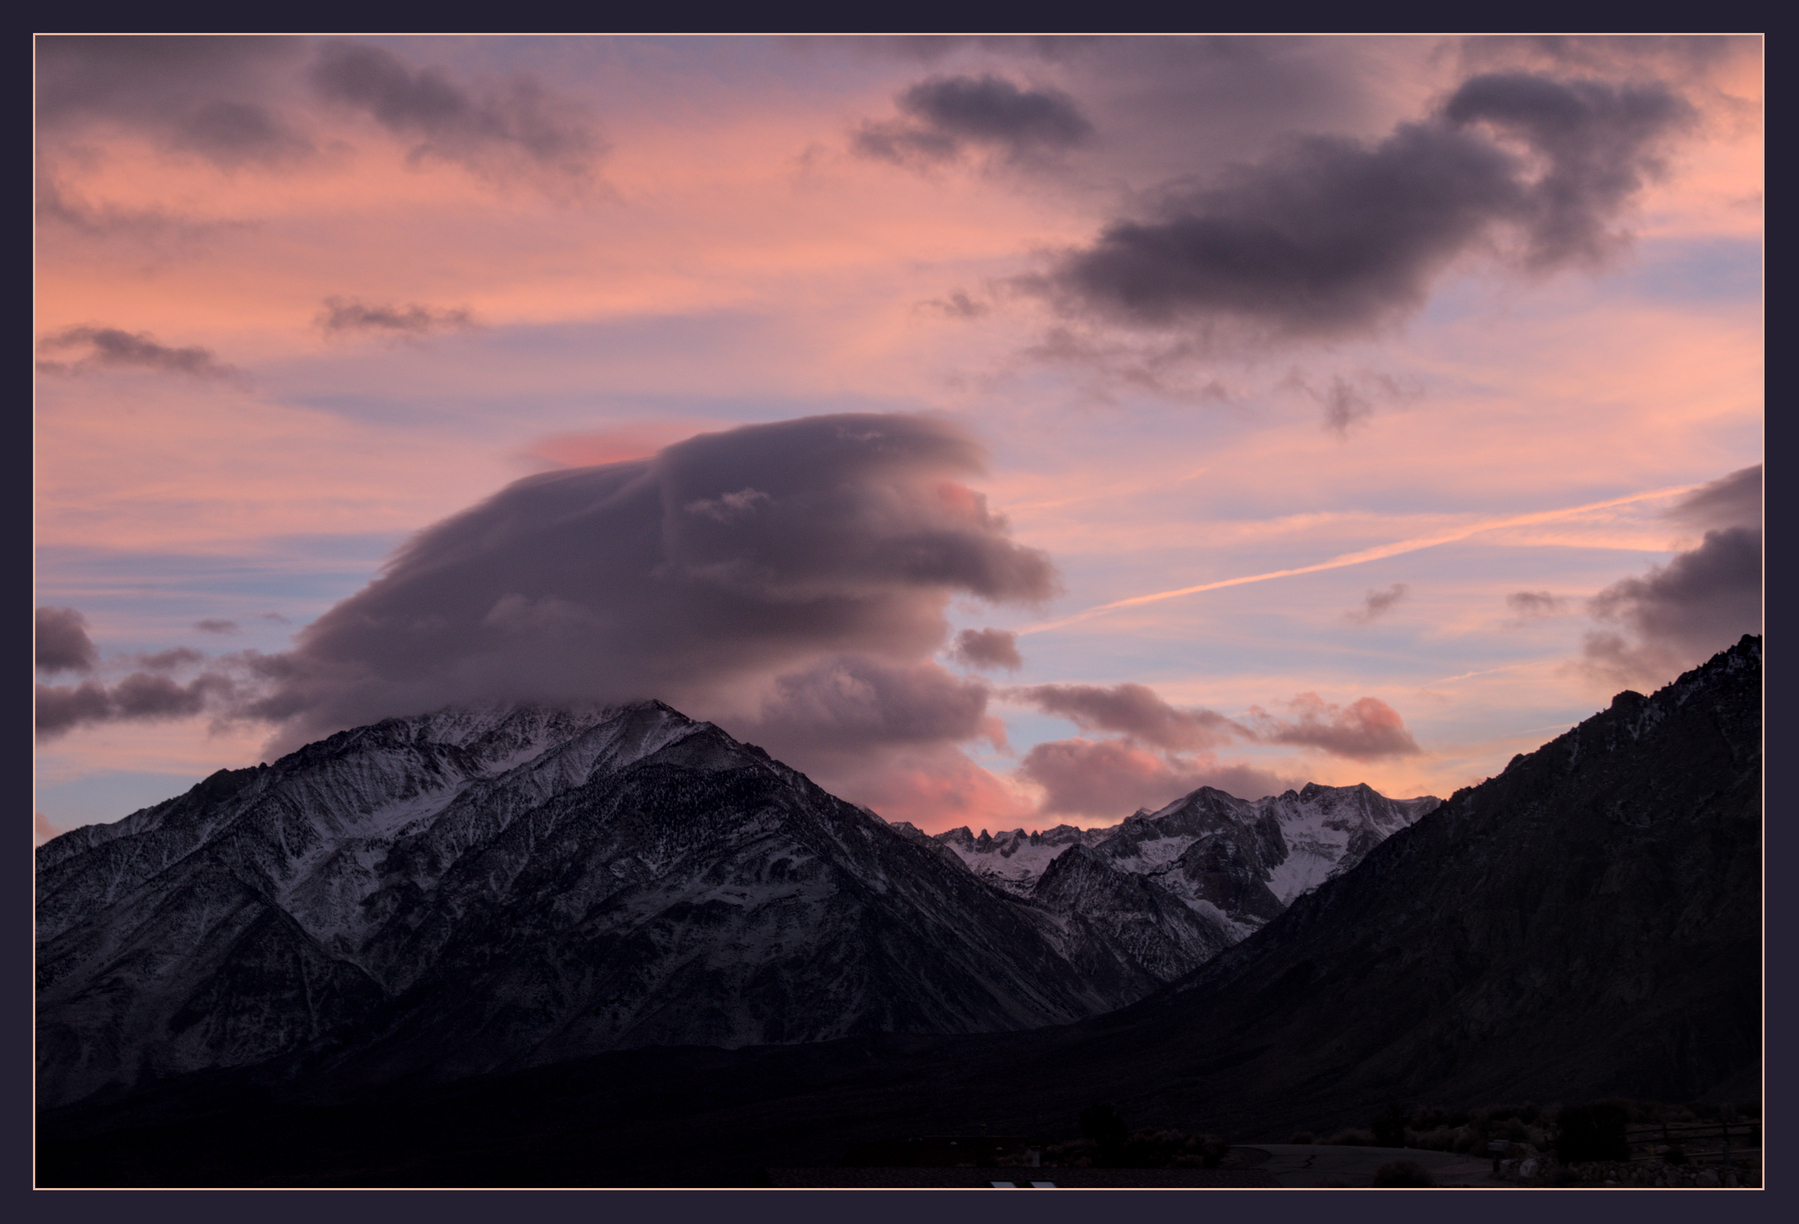 A triangular mountain with  partial snow cover has a large puffball of a cloud sitting on its peak.  The sky behind has high wispy clouds, turned pink by the setting sun, while all the lower clouds are grey.